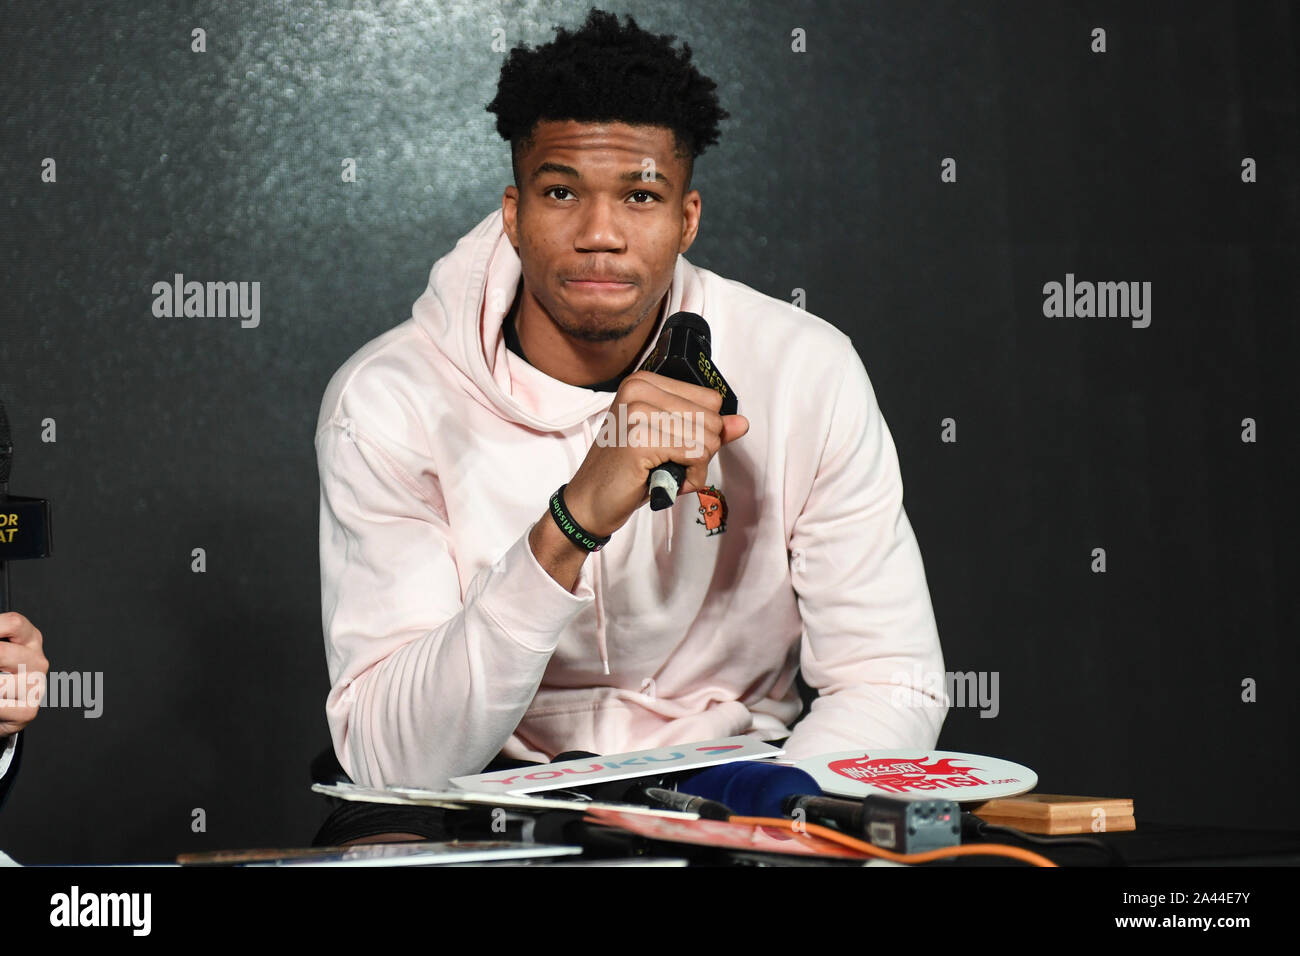 Greek professional basketball player Giannis Antetokounmpo, nicknamed as 'Greek Freak,' shows up at a promotional event of STR8, a French perfume, in Stock Photo